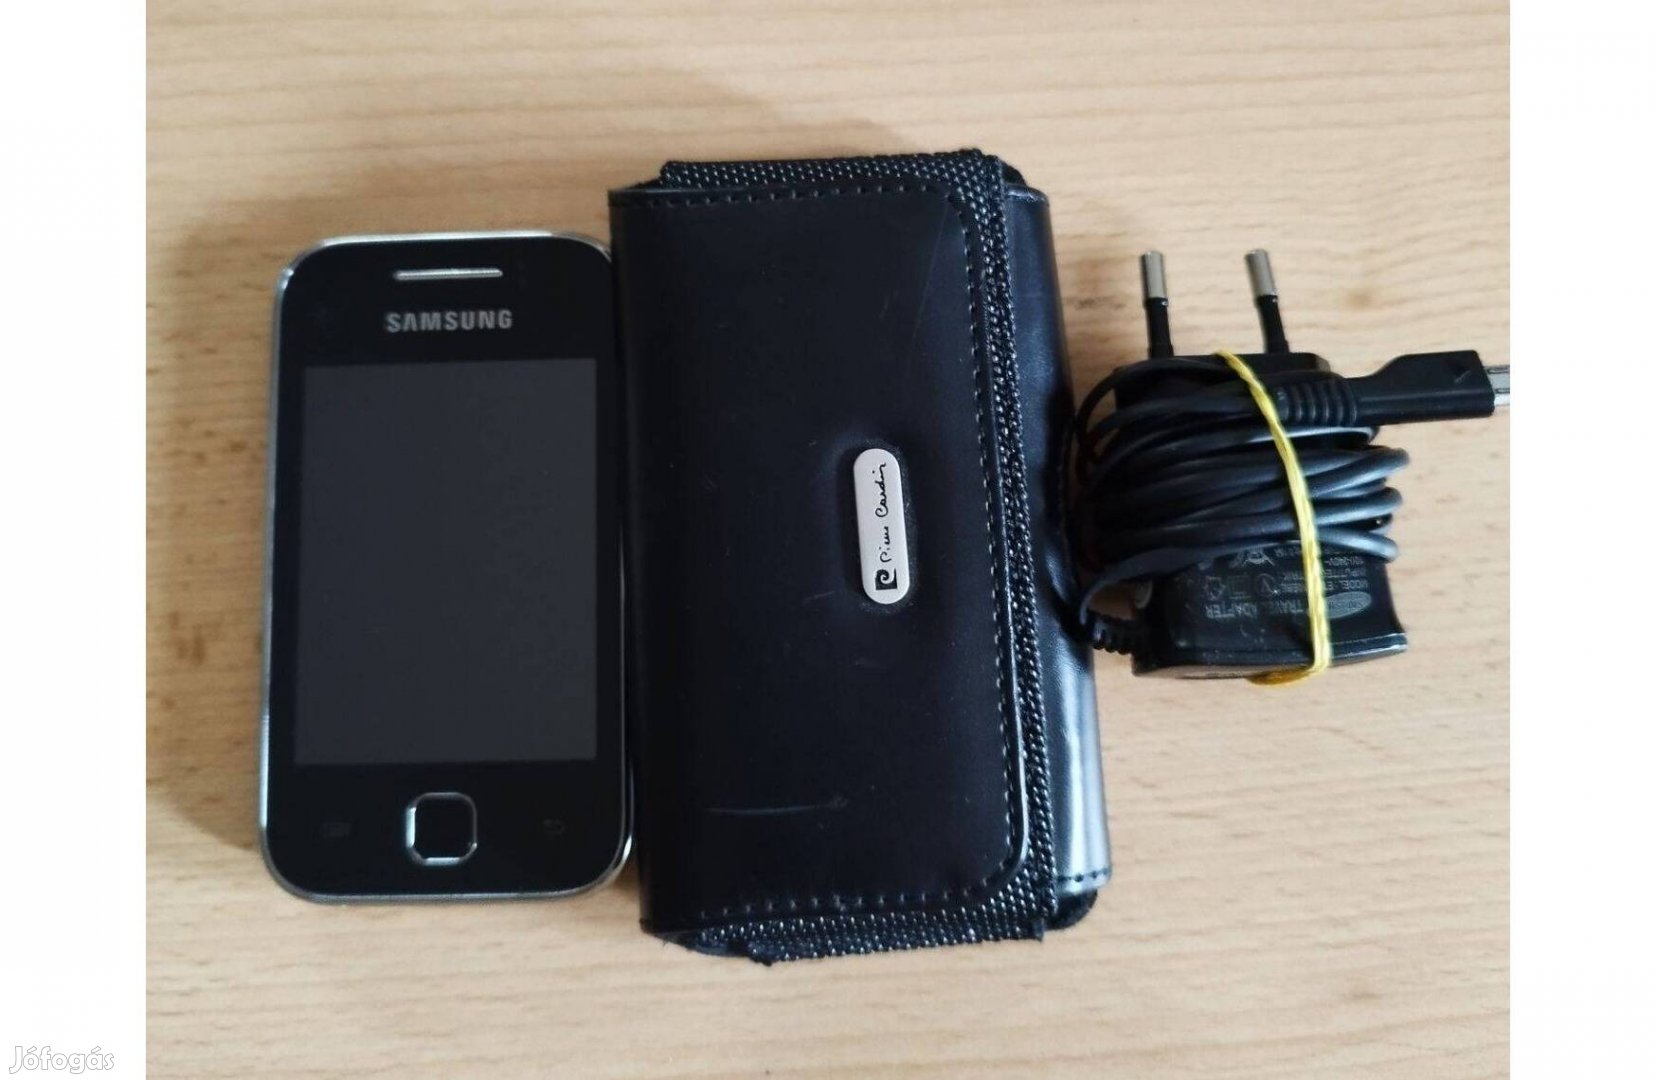 Samsung Galaxy Young GT-S5360